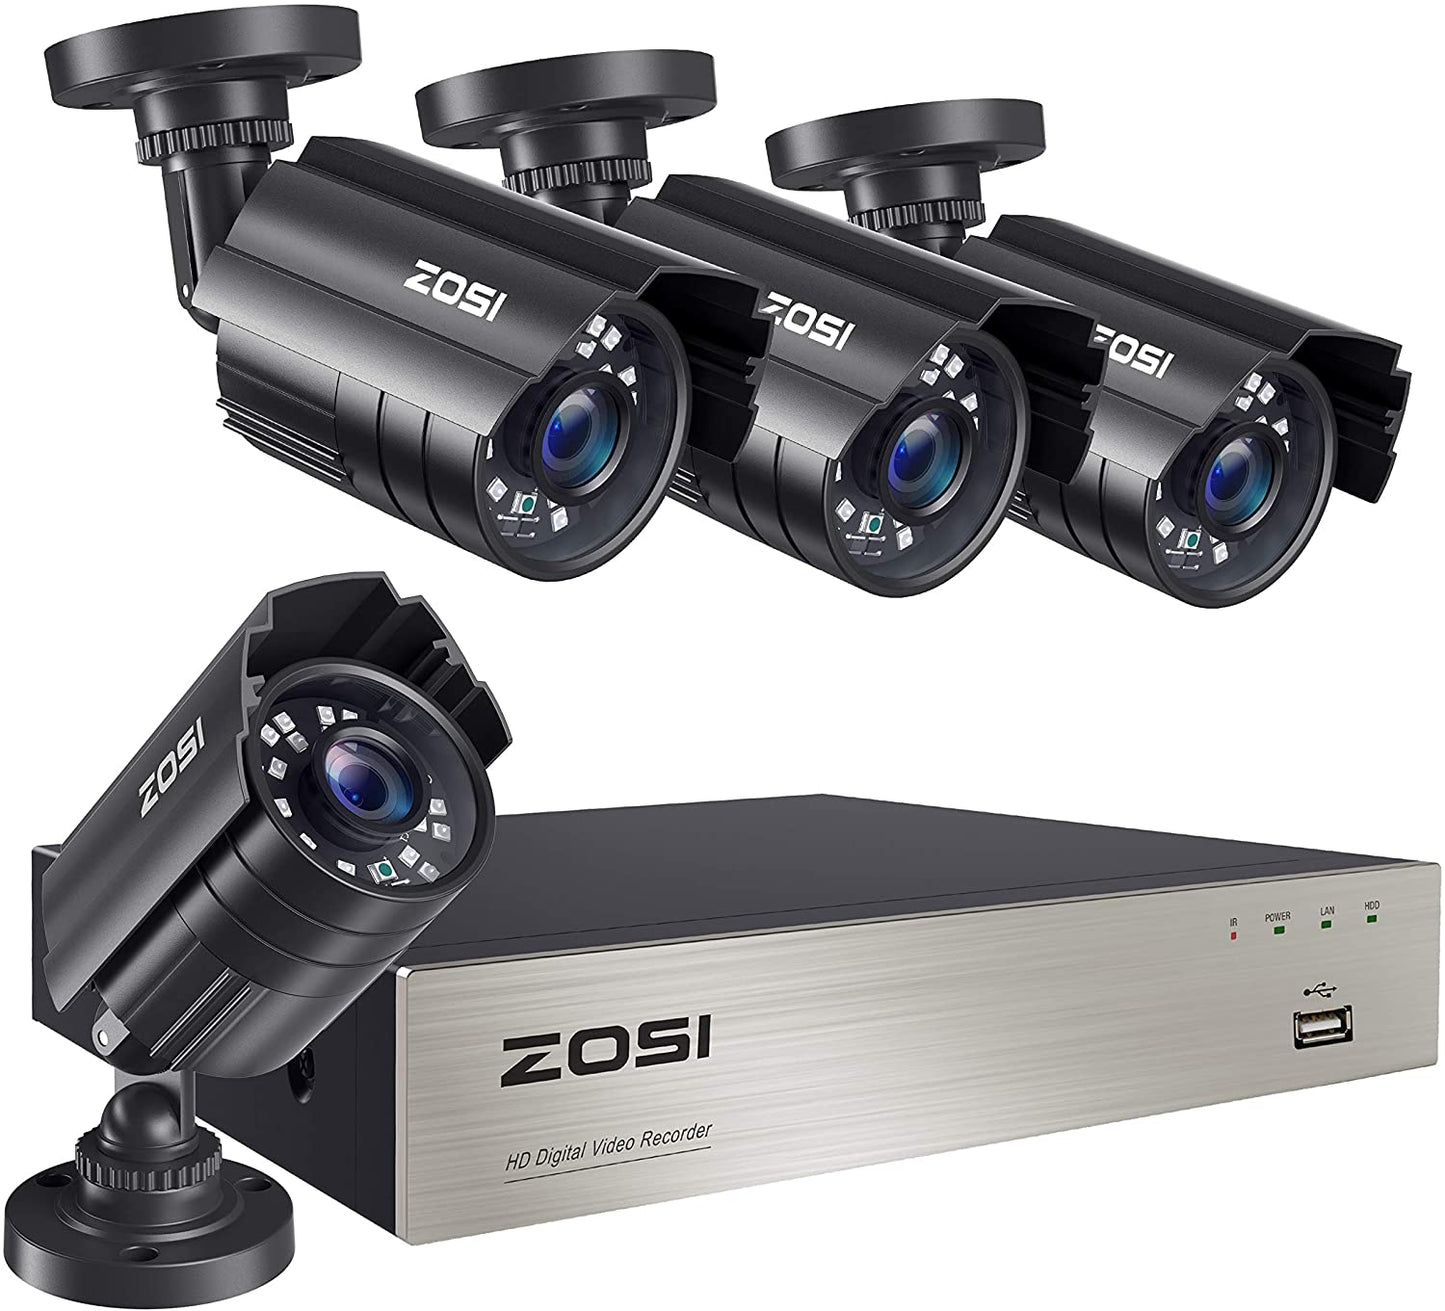 ZOSI SECURITY CAMERA SYSTEM - 8CH DVR & 4 CAMERAS 1080P FULL HD IP66 WATERPROOF | NIGHT VISION